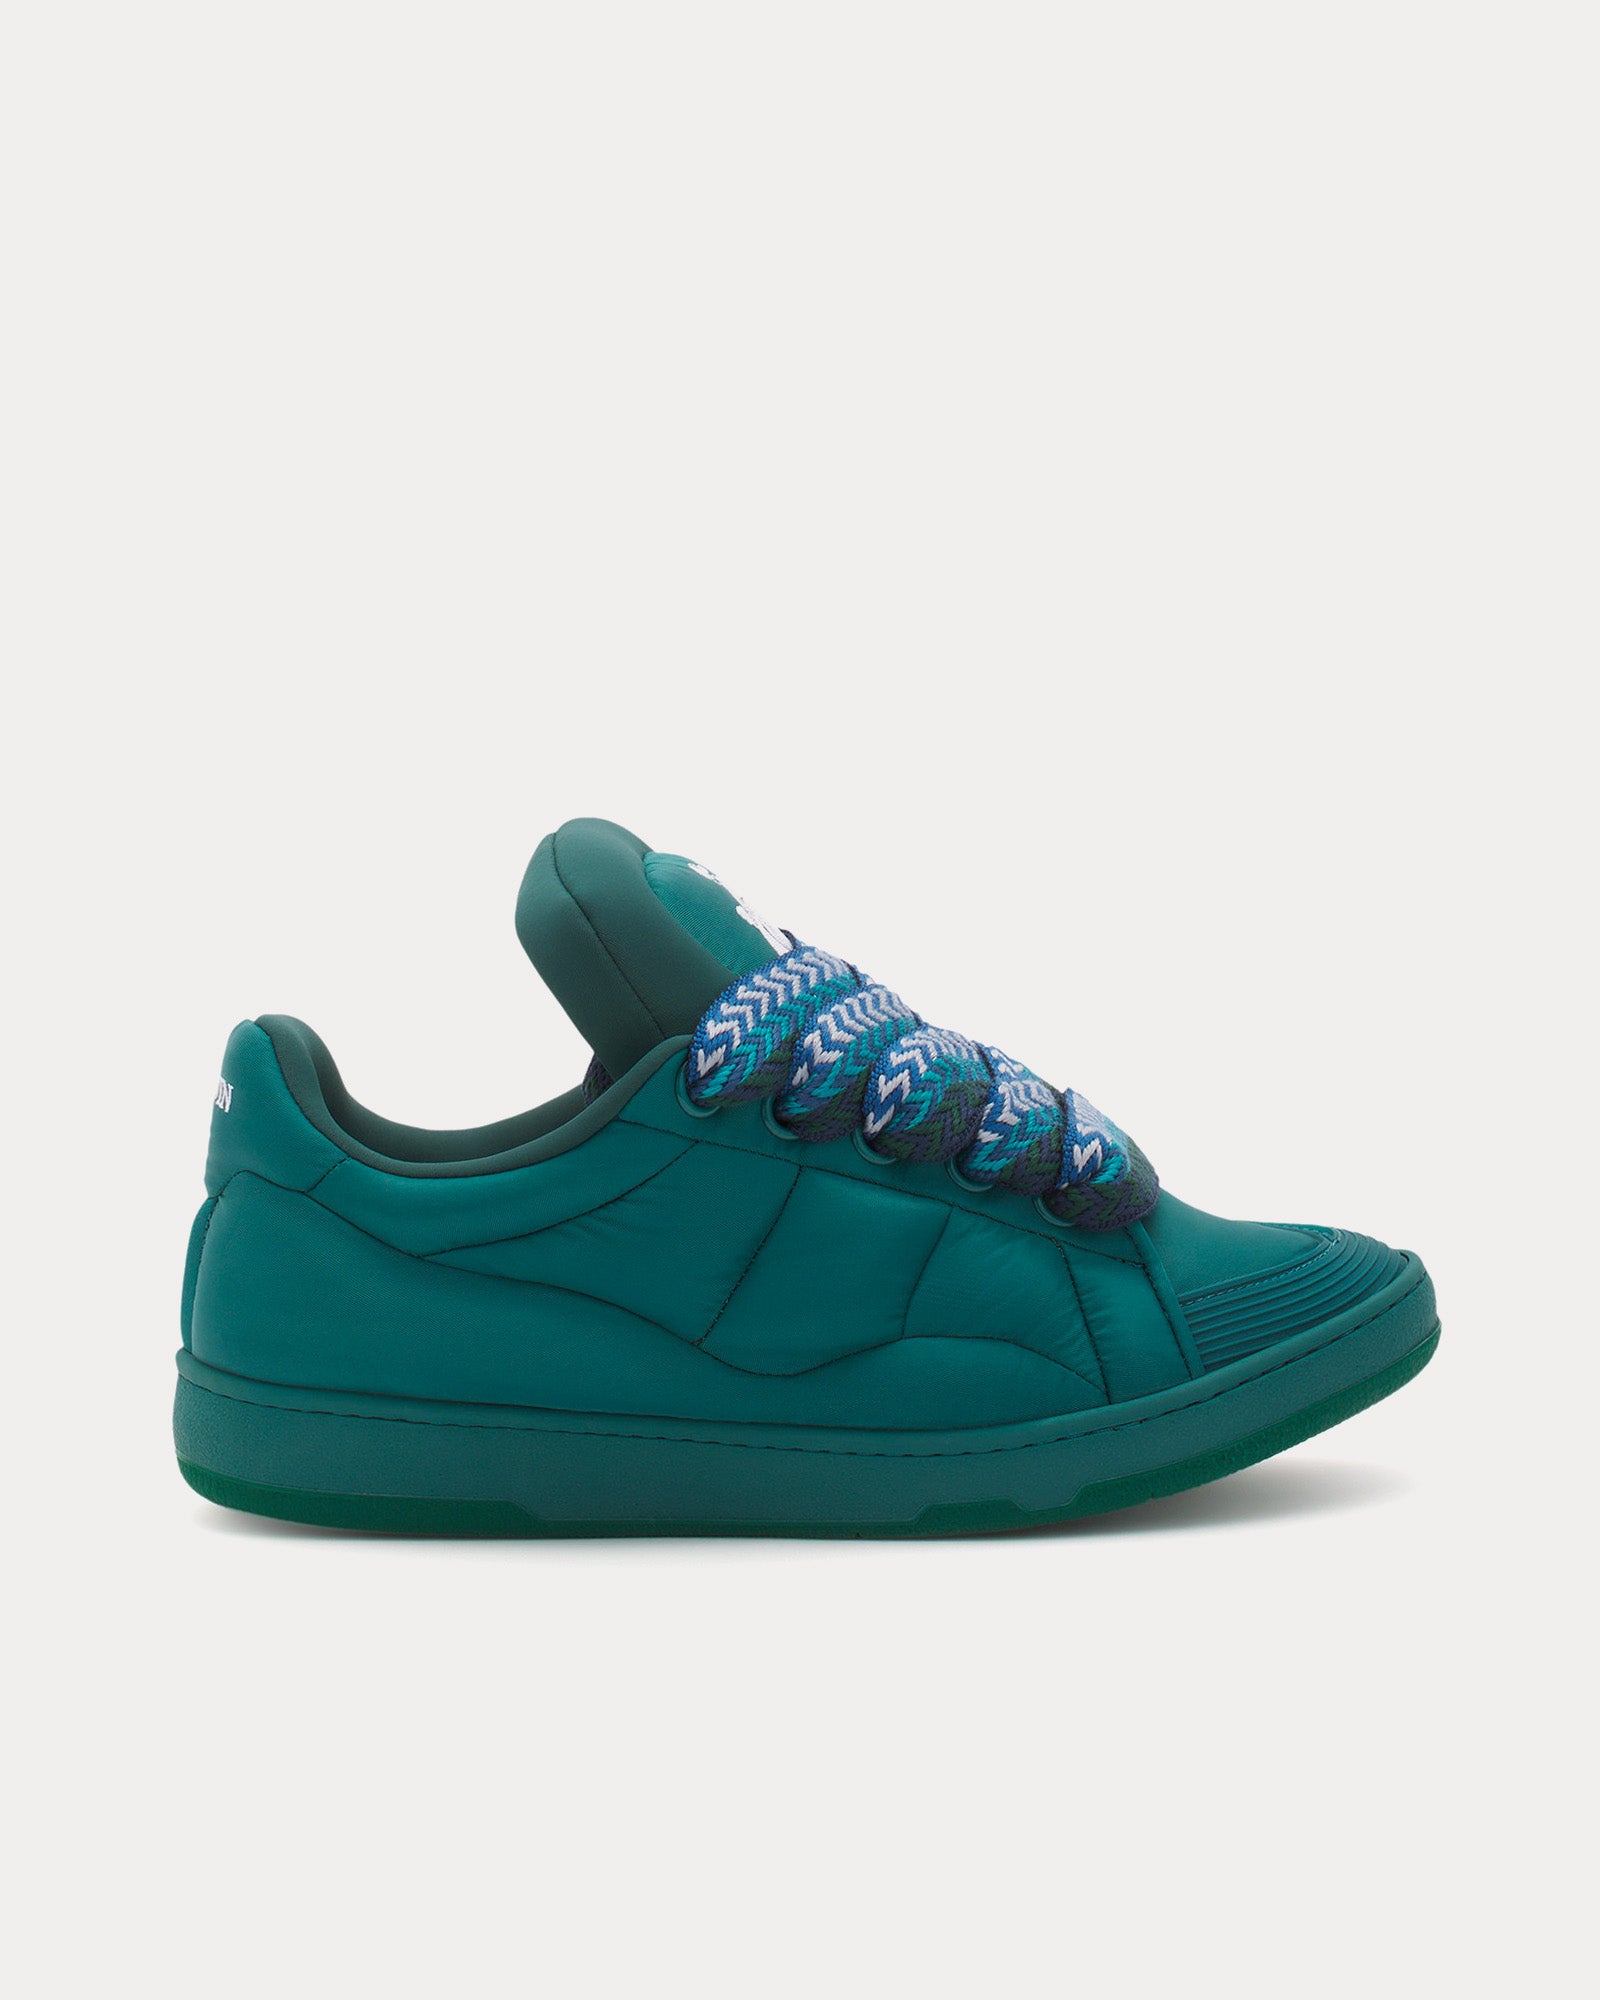 Lanvin - Curb XL Nylon Forest Low Top Sneakers